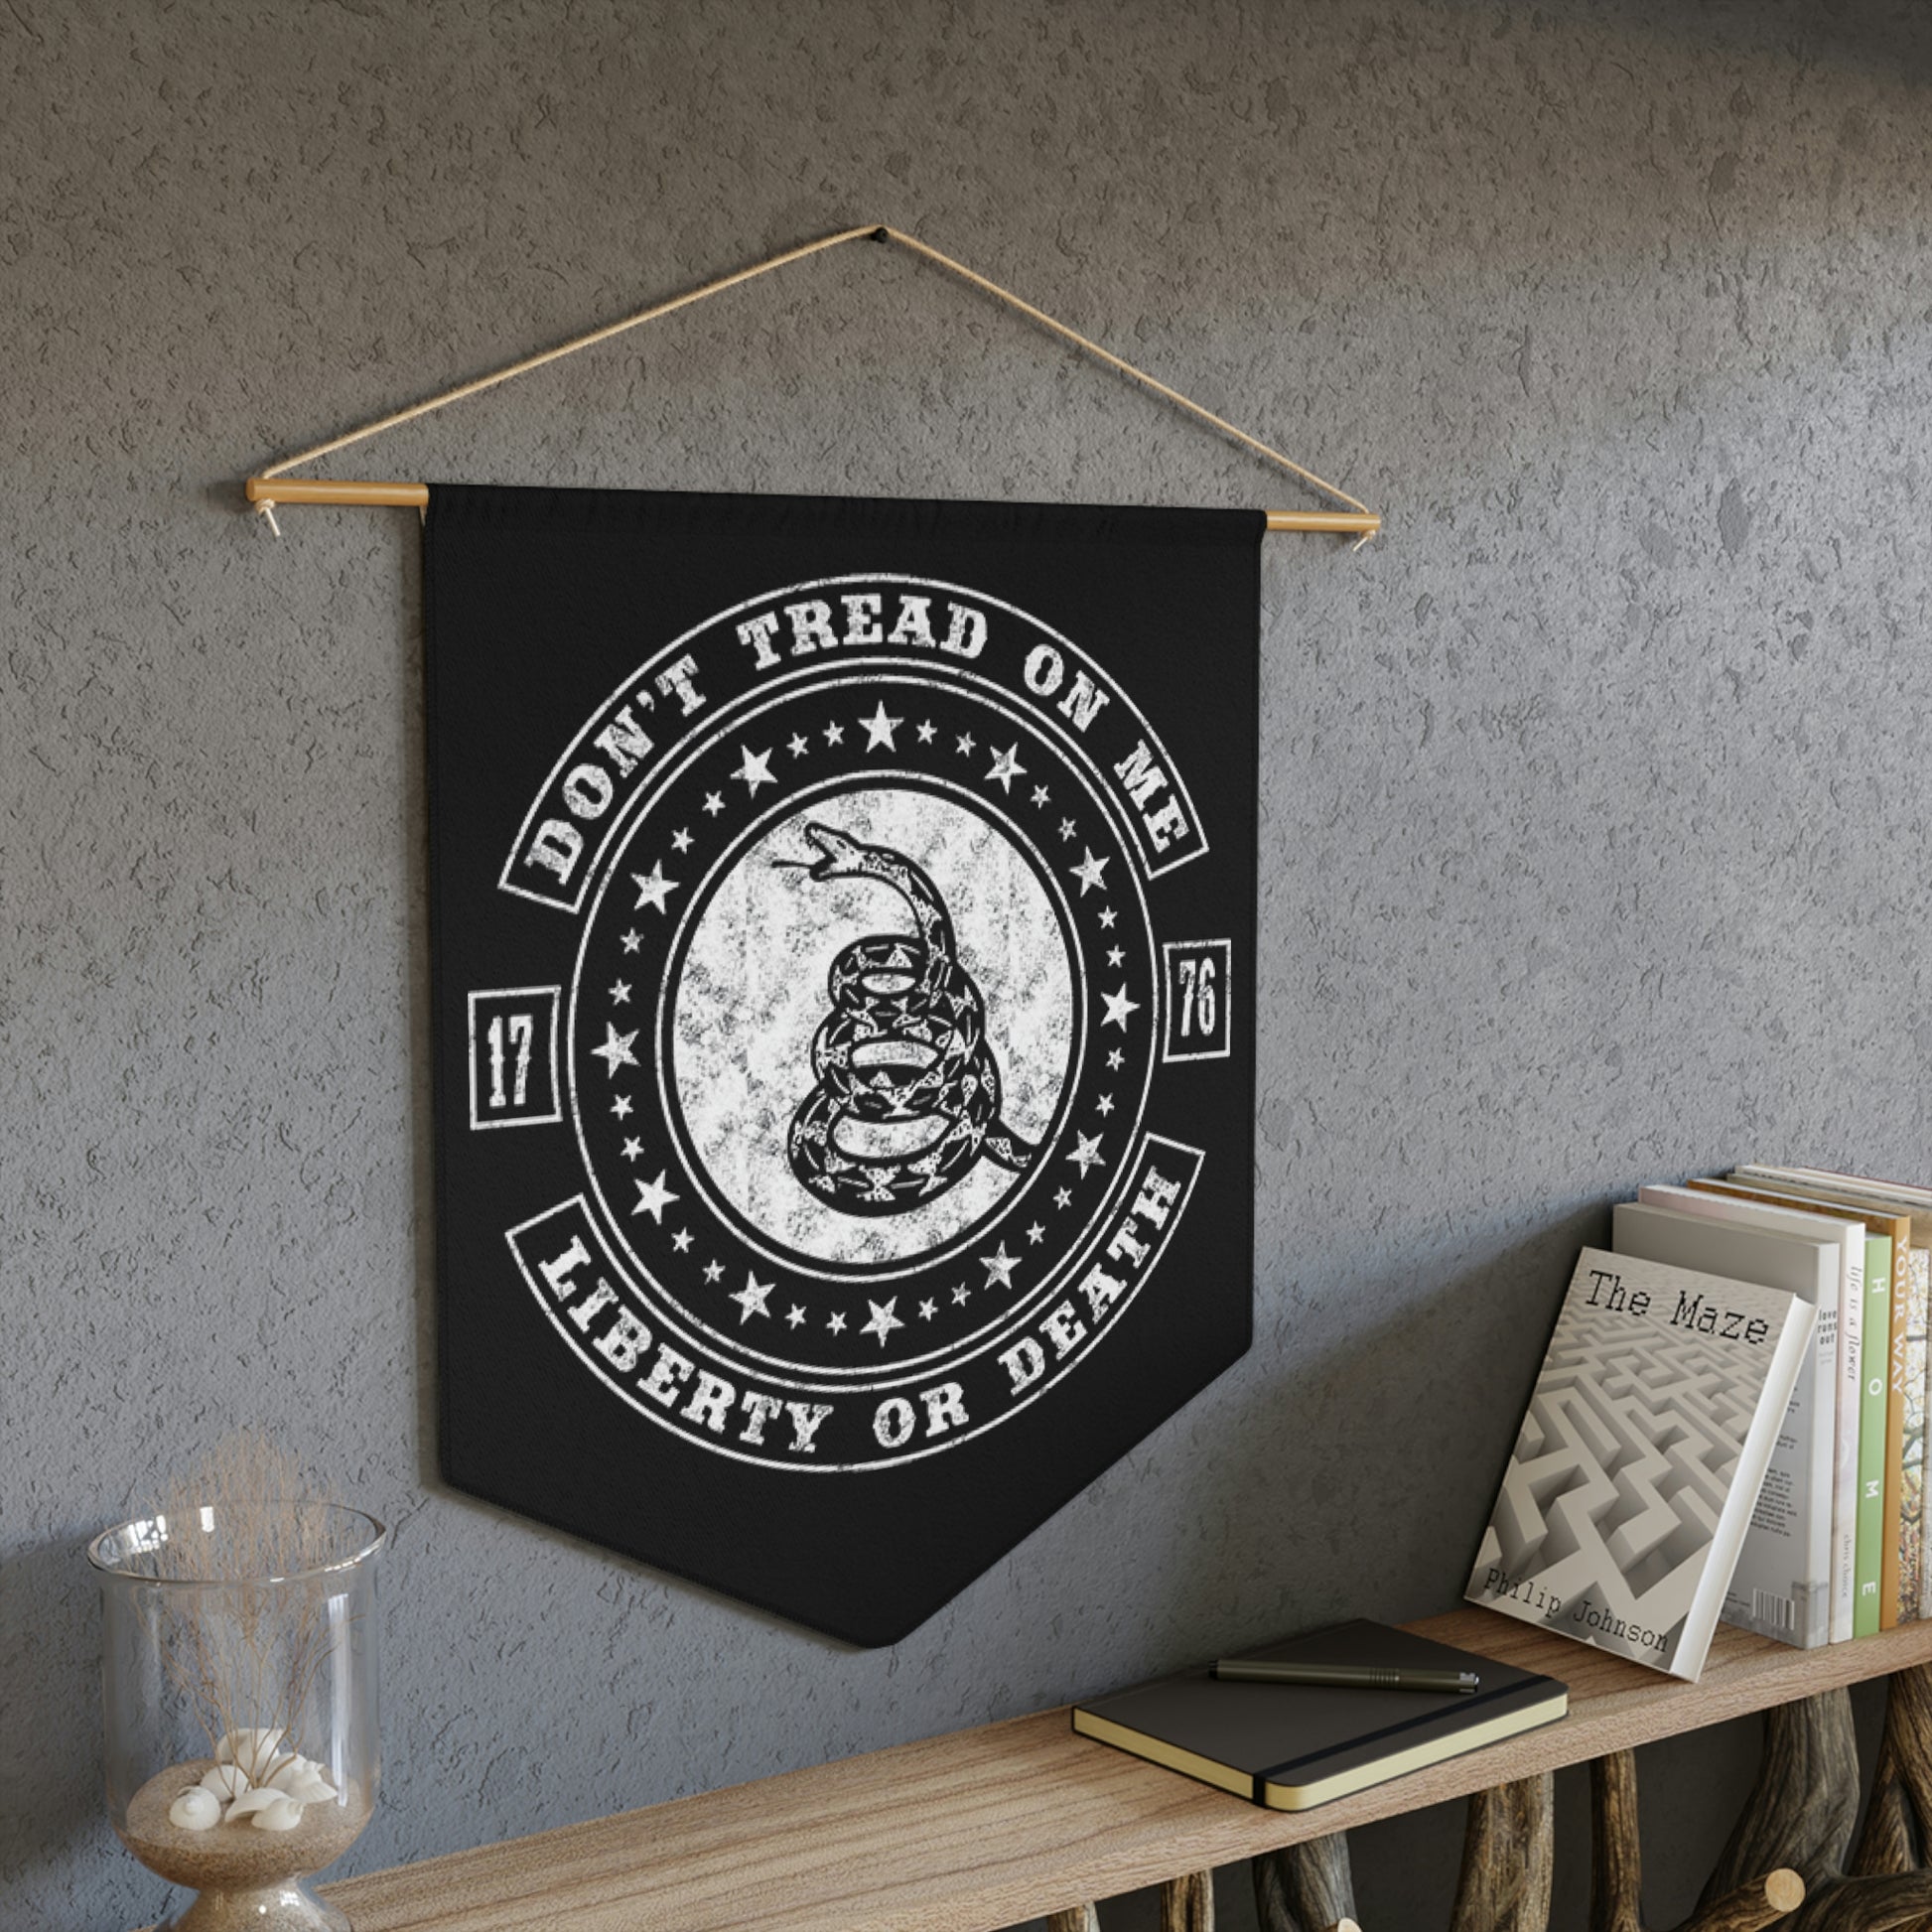 Don't Tread On Me Wall Pennant - Backwoods Branding Co.